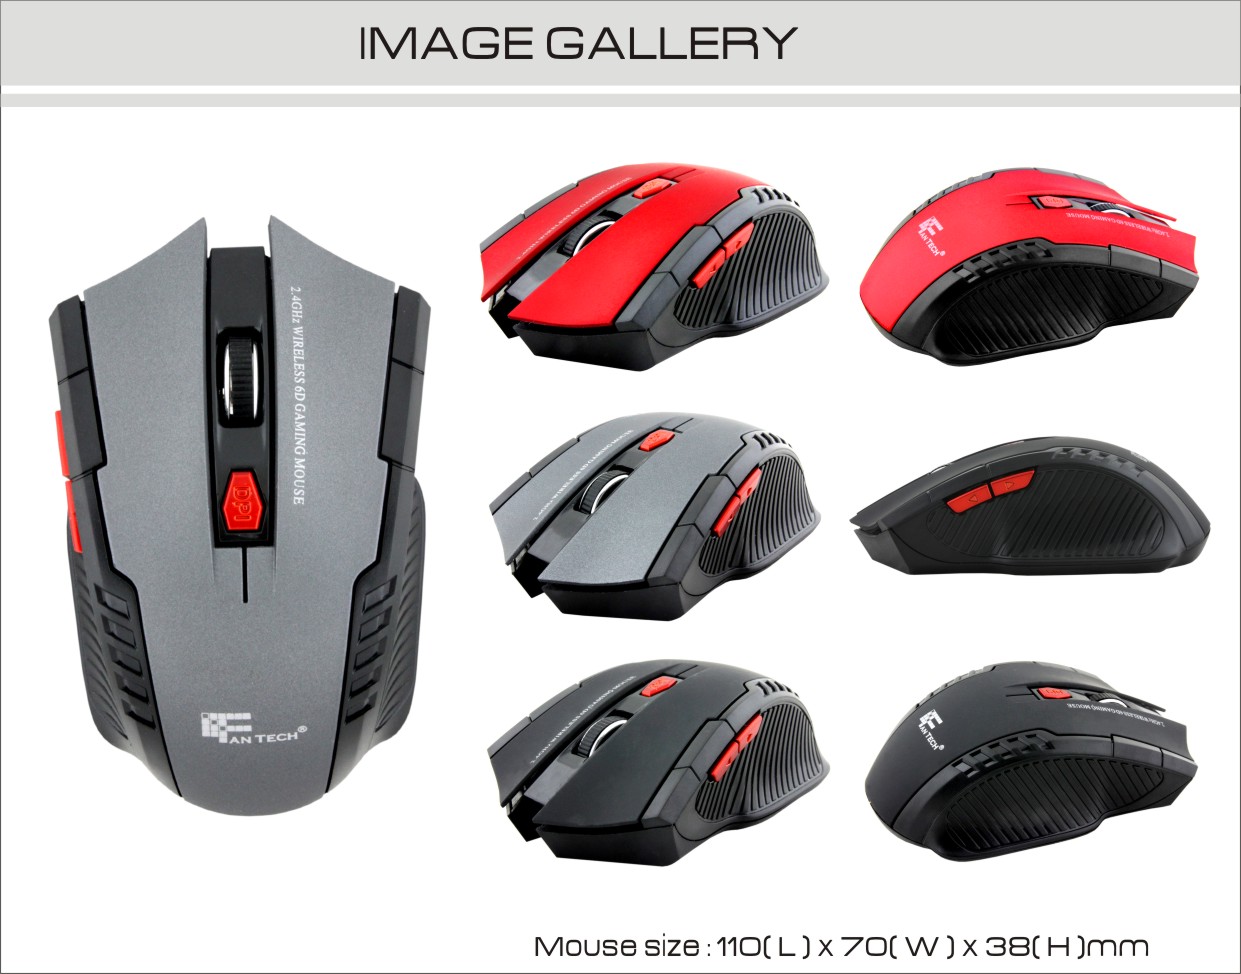 2.4ghz wireless gaming mouse